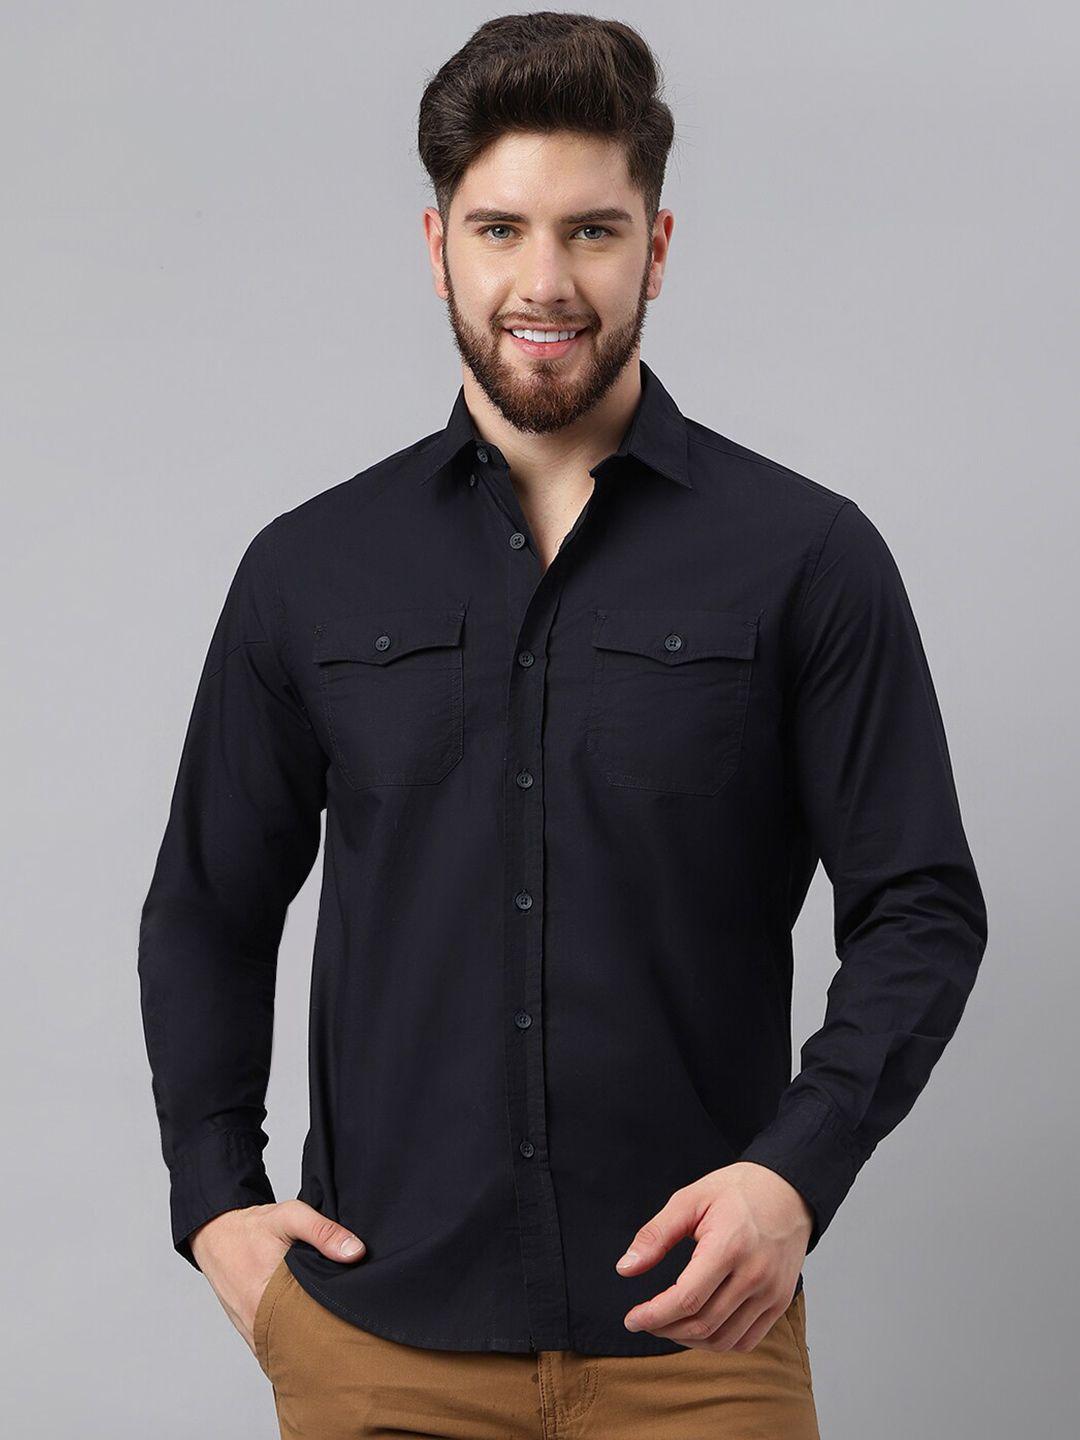 woodland oxford weave pure cotton casual shirt